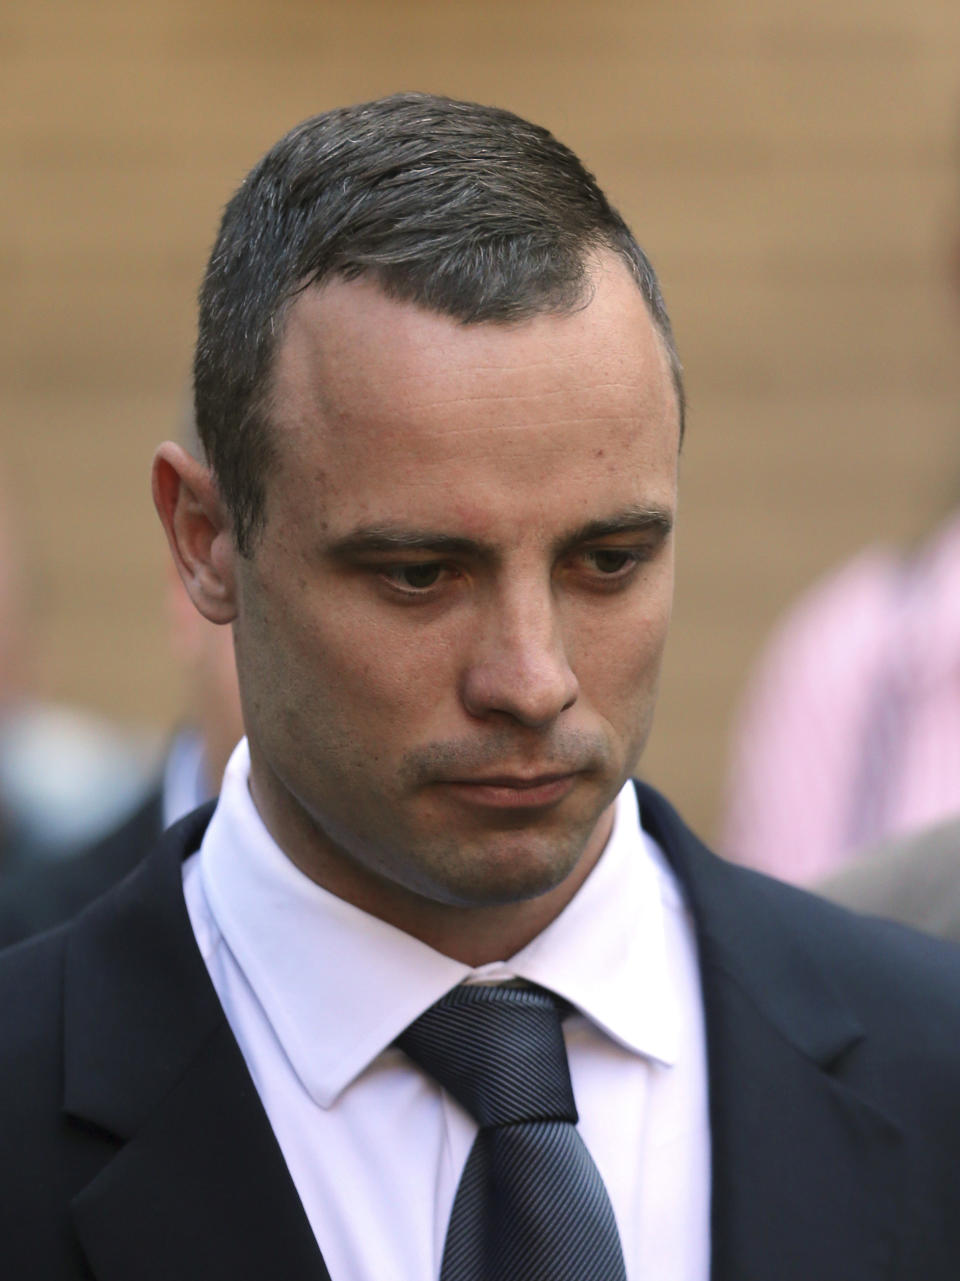 Oscar Pistorius leaves the high court in Pretoria, South Africa, Wednesday, May 14, 2014. The judge overseeing the murder trial of Pistorius on Wednesday ordered the double-amputee athlete to undergo psychiatric tests, meaning that the trial proceedings will be delayed. (AP Photo/Themba Hadebe)